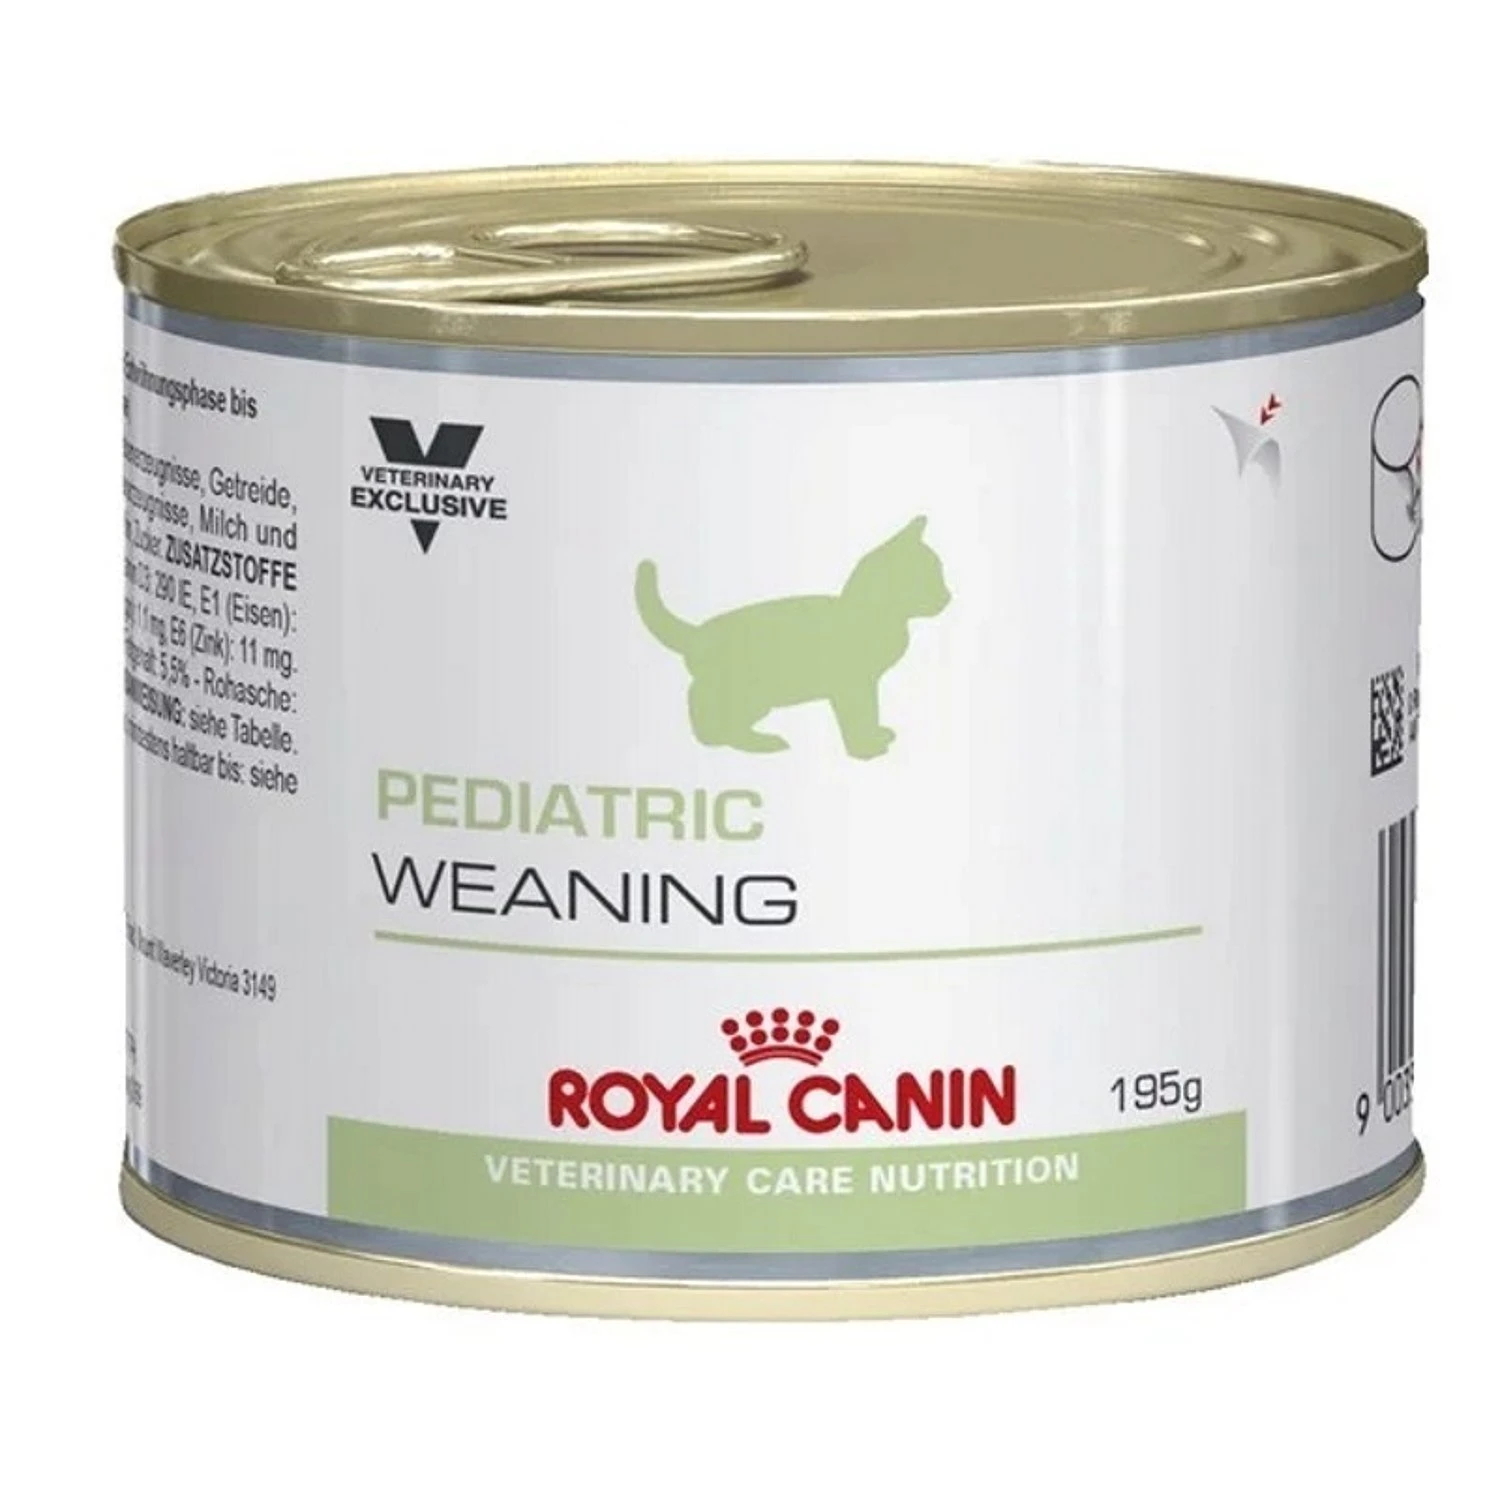 Oh jee Grens boerderij Feed for kittens Royal Canin pediatric Wenning 0.195 kg in 2 stages of  growth|Cat Dry Food| - AliExpress